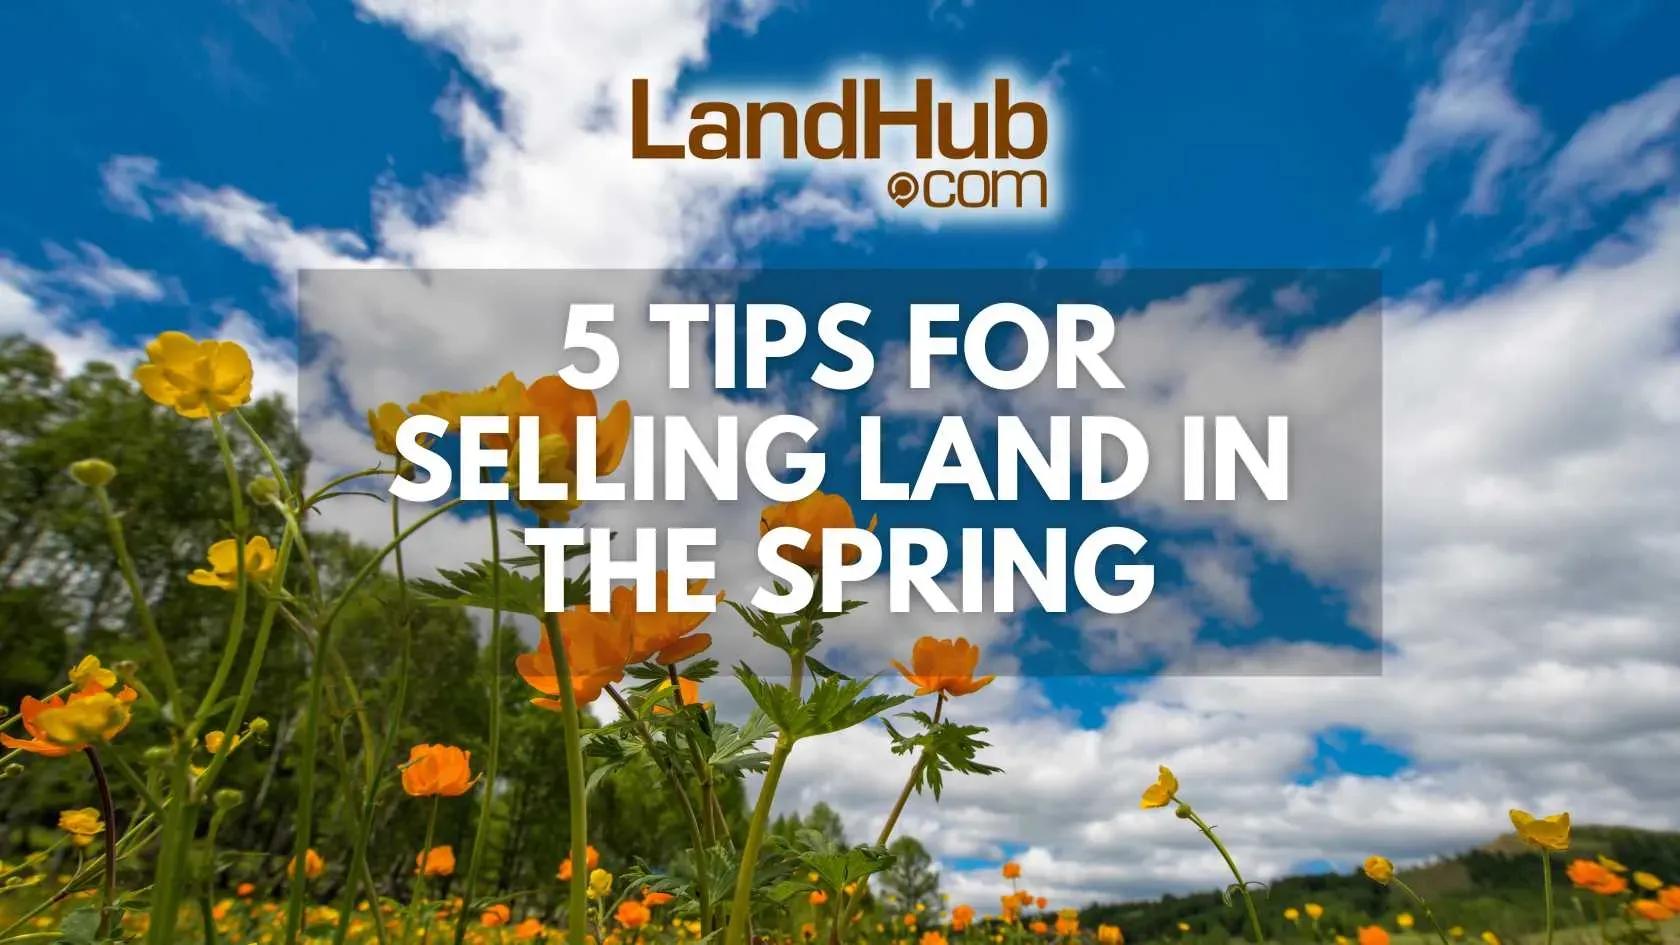 5 tips for selling land in the spring